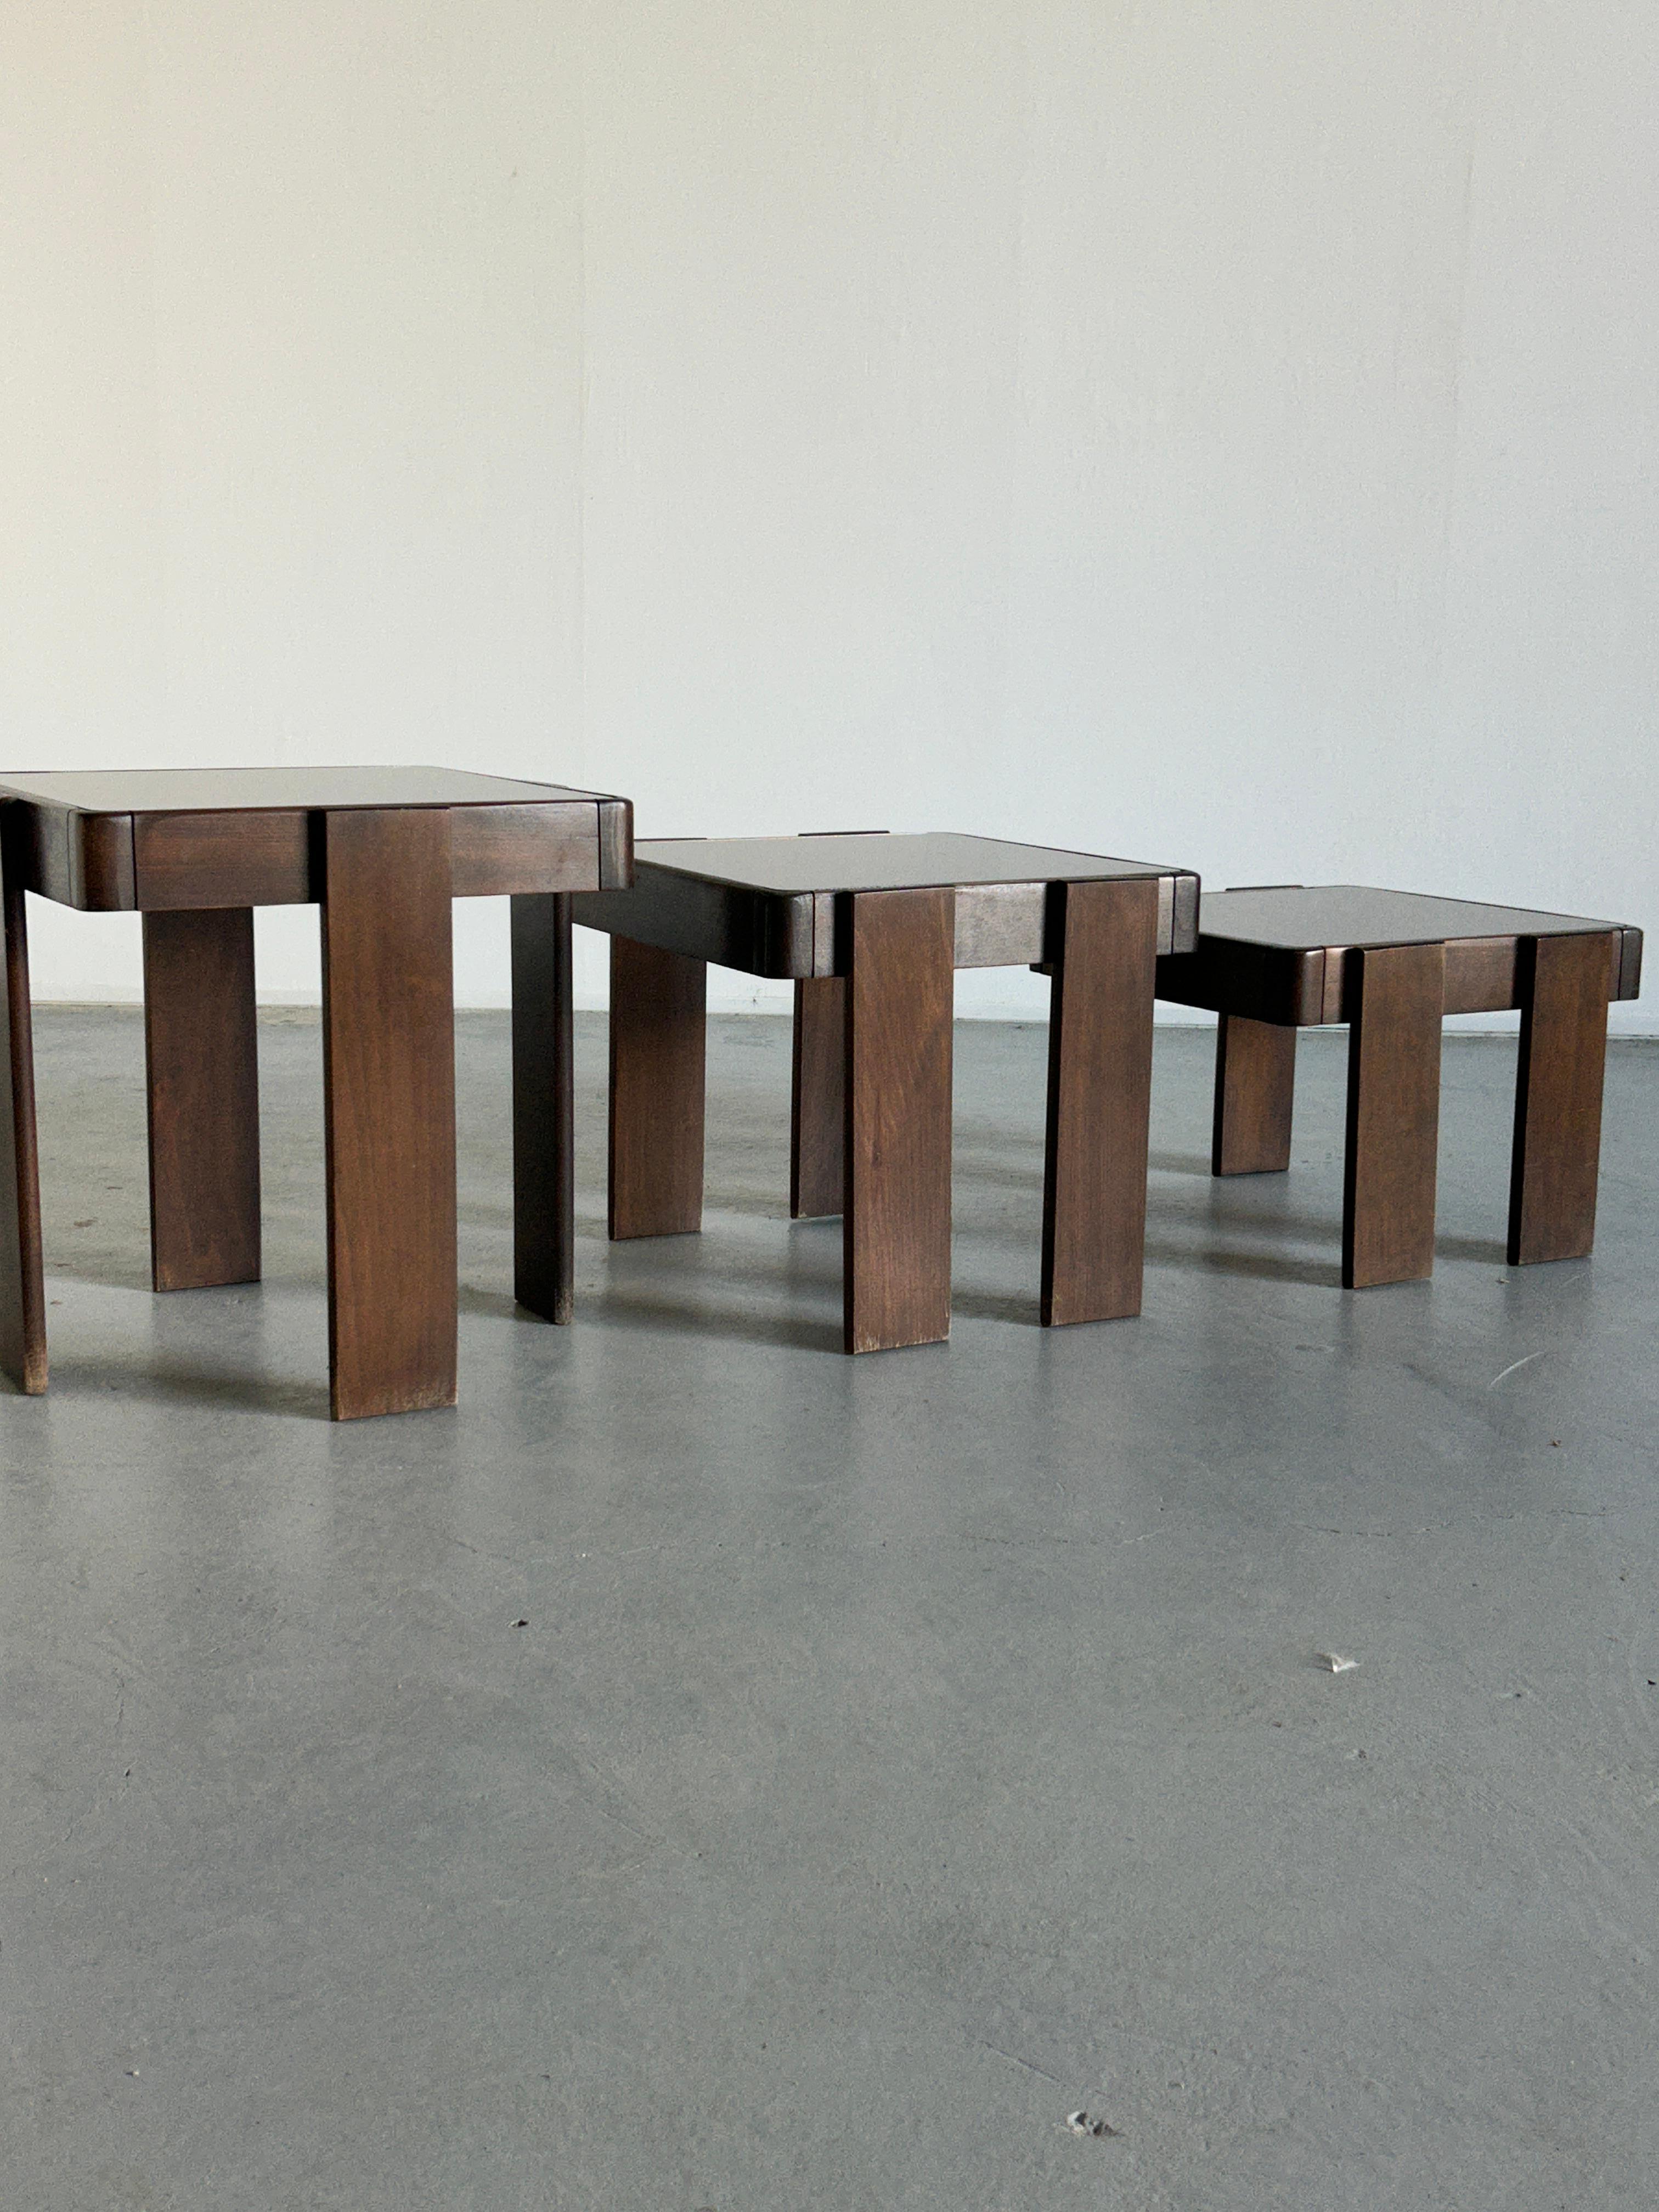 Set of three stacking tables designed by Gianfranco Frattini, for Cassina in the 1970s. 
A vintage Yugoslavian production from the late 1970s or early 1980s (not a Cassina production).

Overall, the tables are in very good vintage condition with no